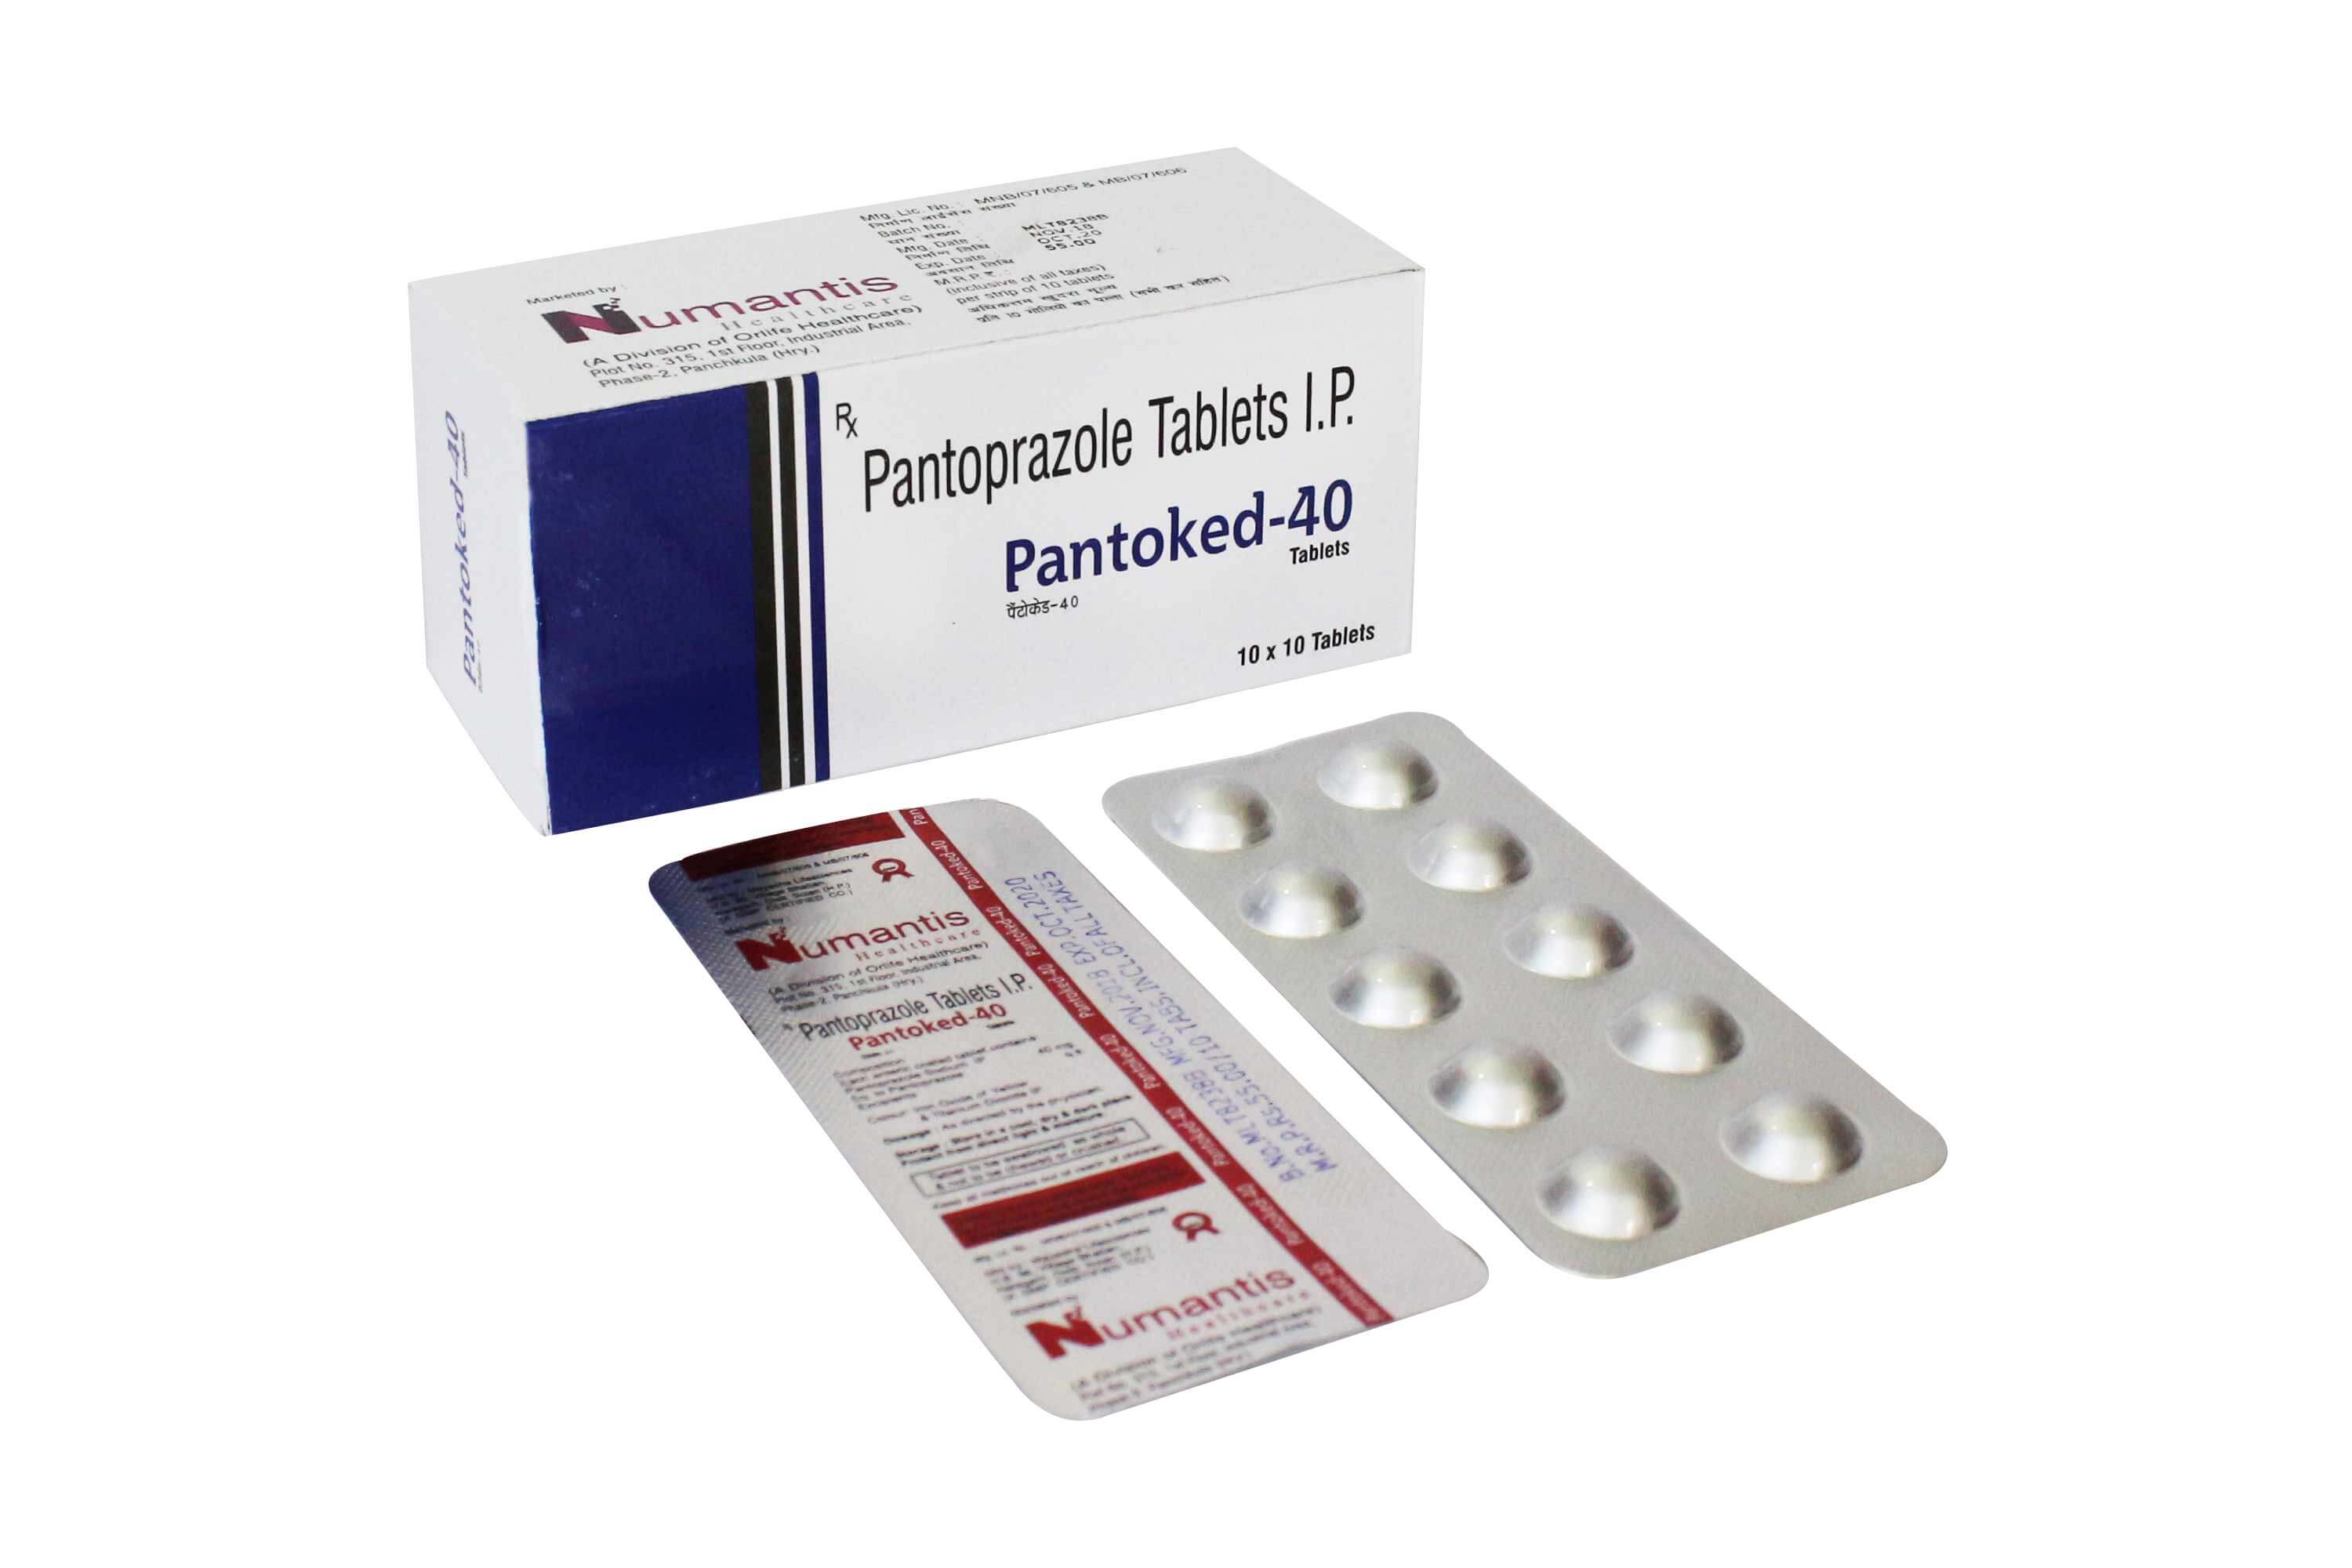 Product Name: Pantoked 40, Compositions of Pantoked 40 are Pantoprazole Tablets I.P. - Numantis Healthcare